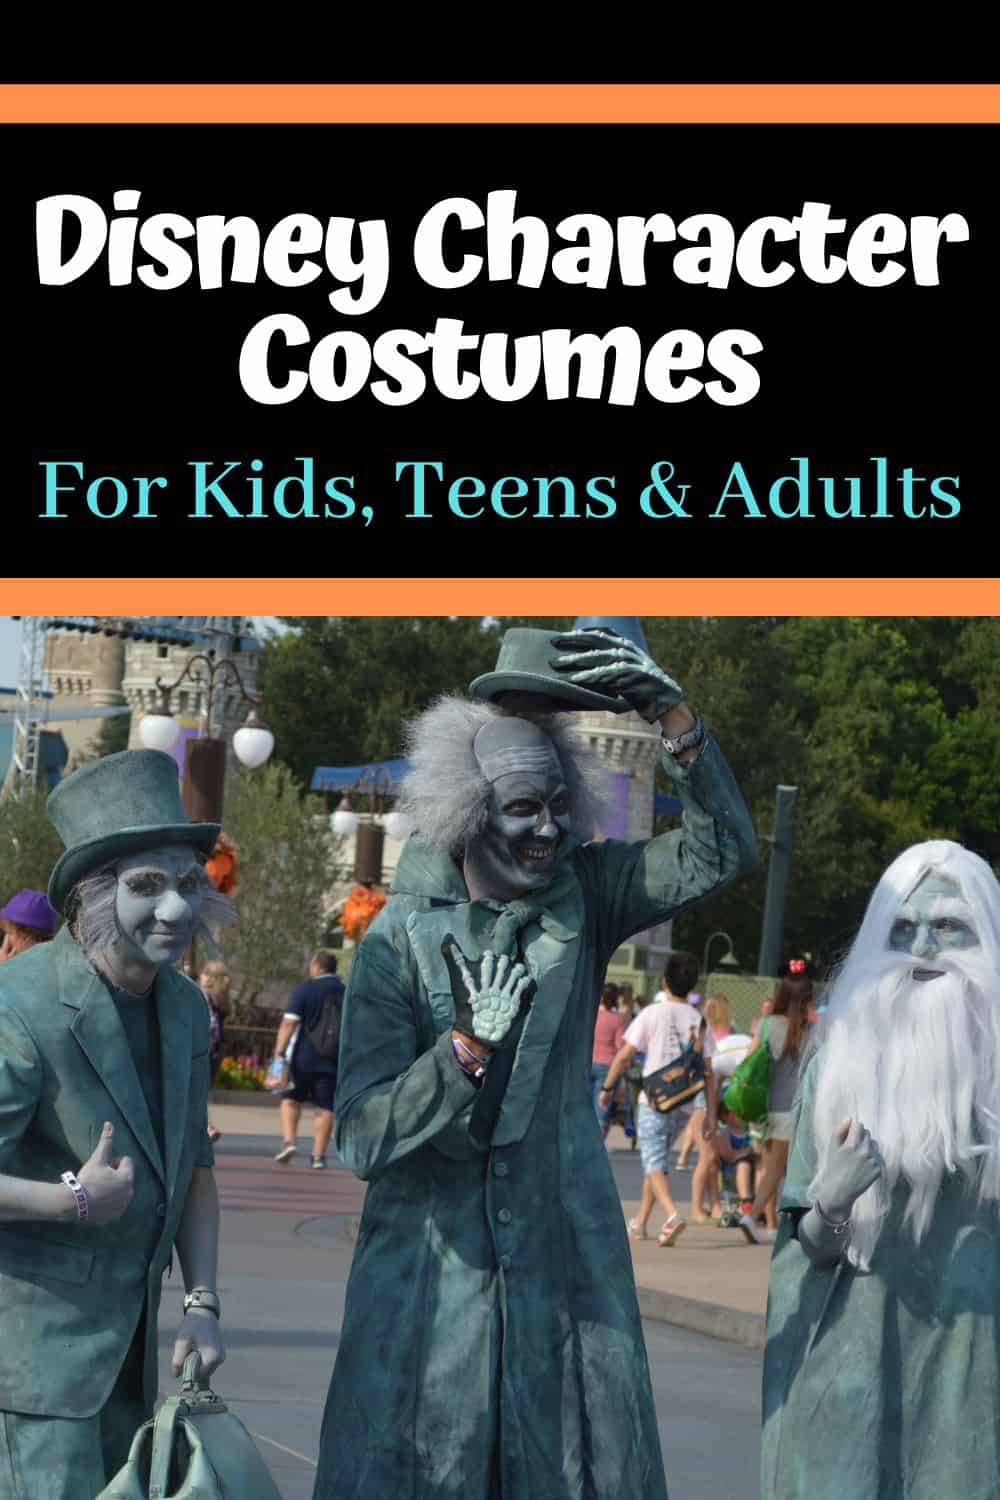 Disney Character Costumes for Kids, Teens & Adults